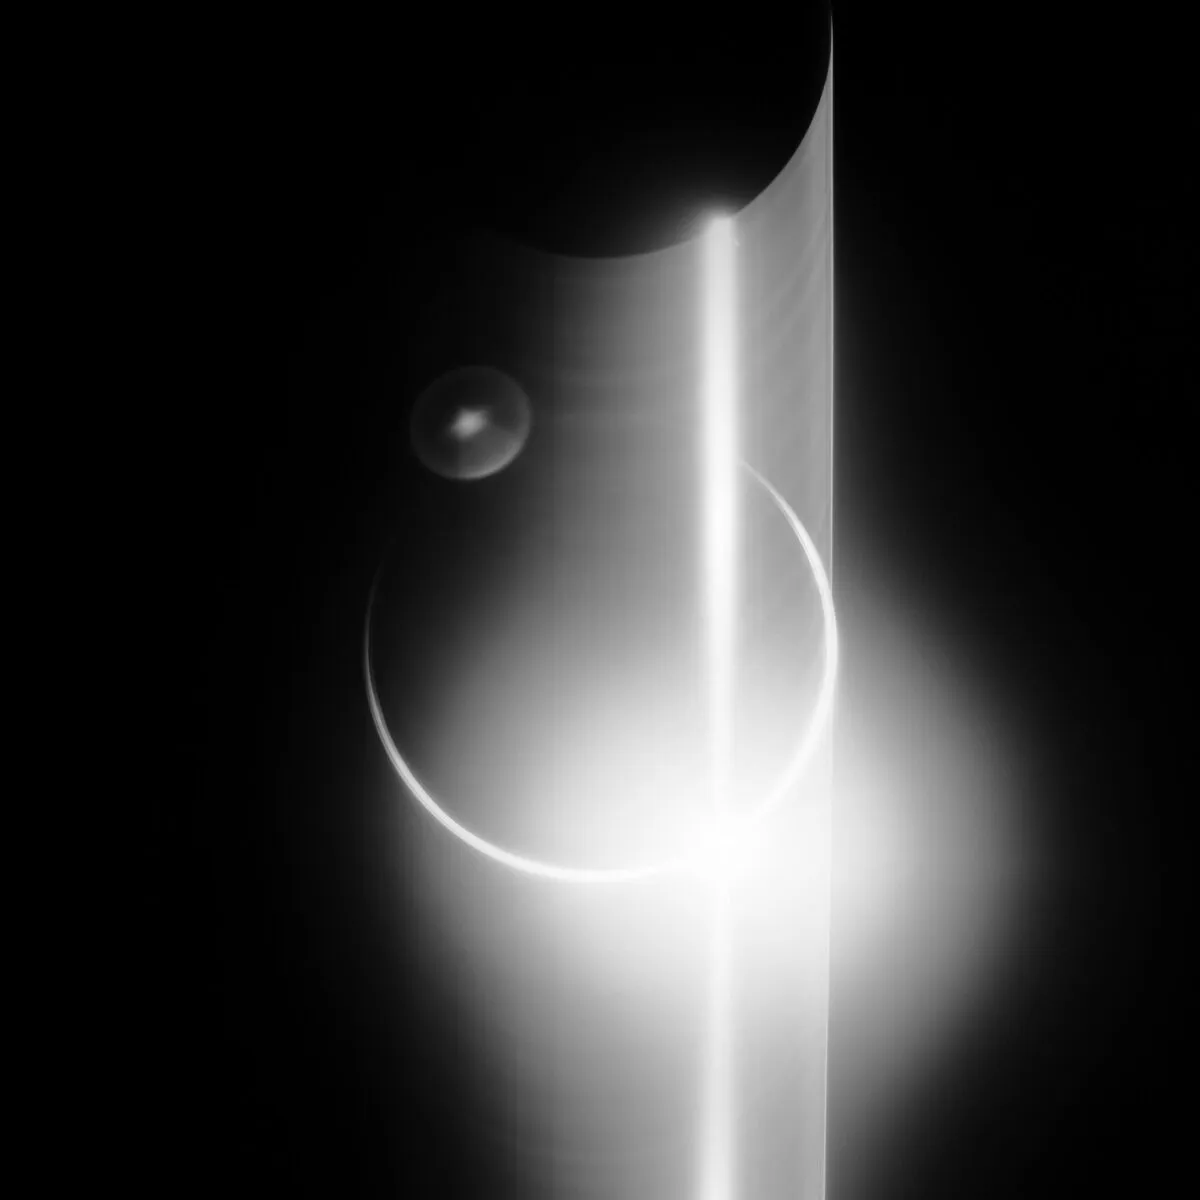 An attempt to capture a total eclipse of the Sun by the Earth with a long exposure during Apollo 12, 24 November 1969. A glowing ring of atmosphere can be seen around Earth, but the thin circle is blurred by hand shake and a camera malfunction has spread the light vertically across the image. Credit: NASA / restored by Toby Ord